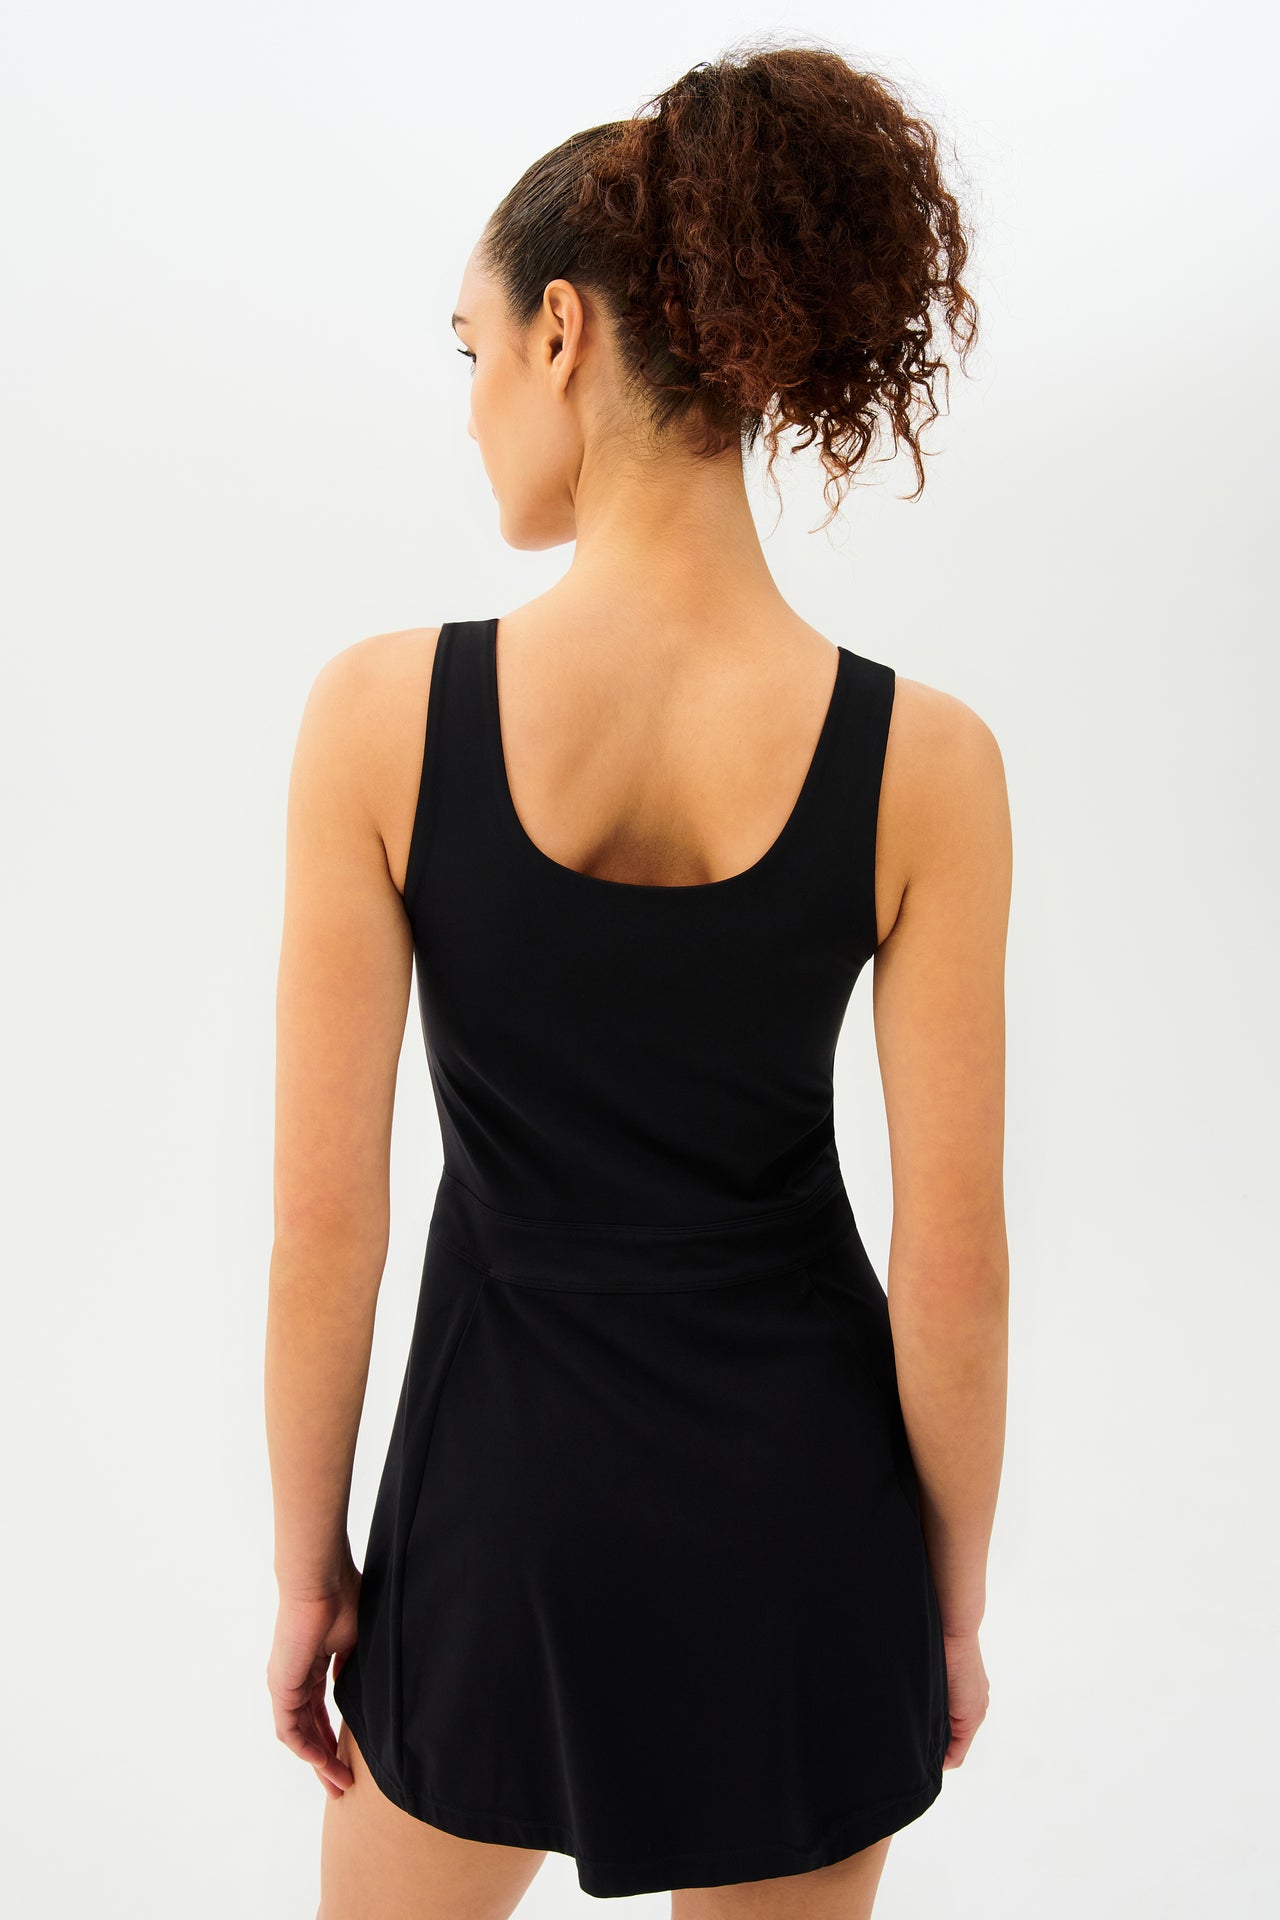 The back view of a woman wearing a SPLITS59 Martina Rigor Dress in Black.